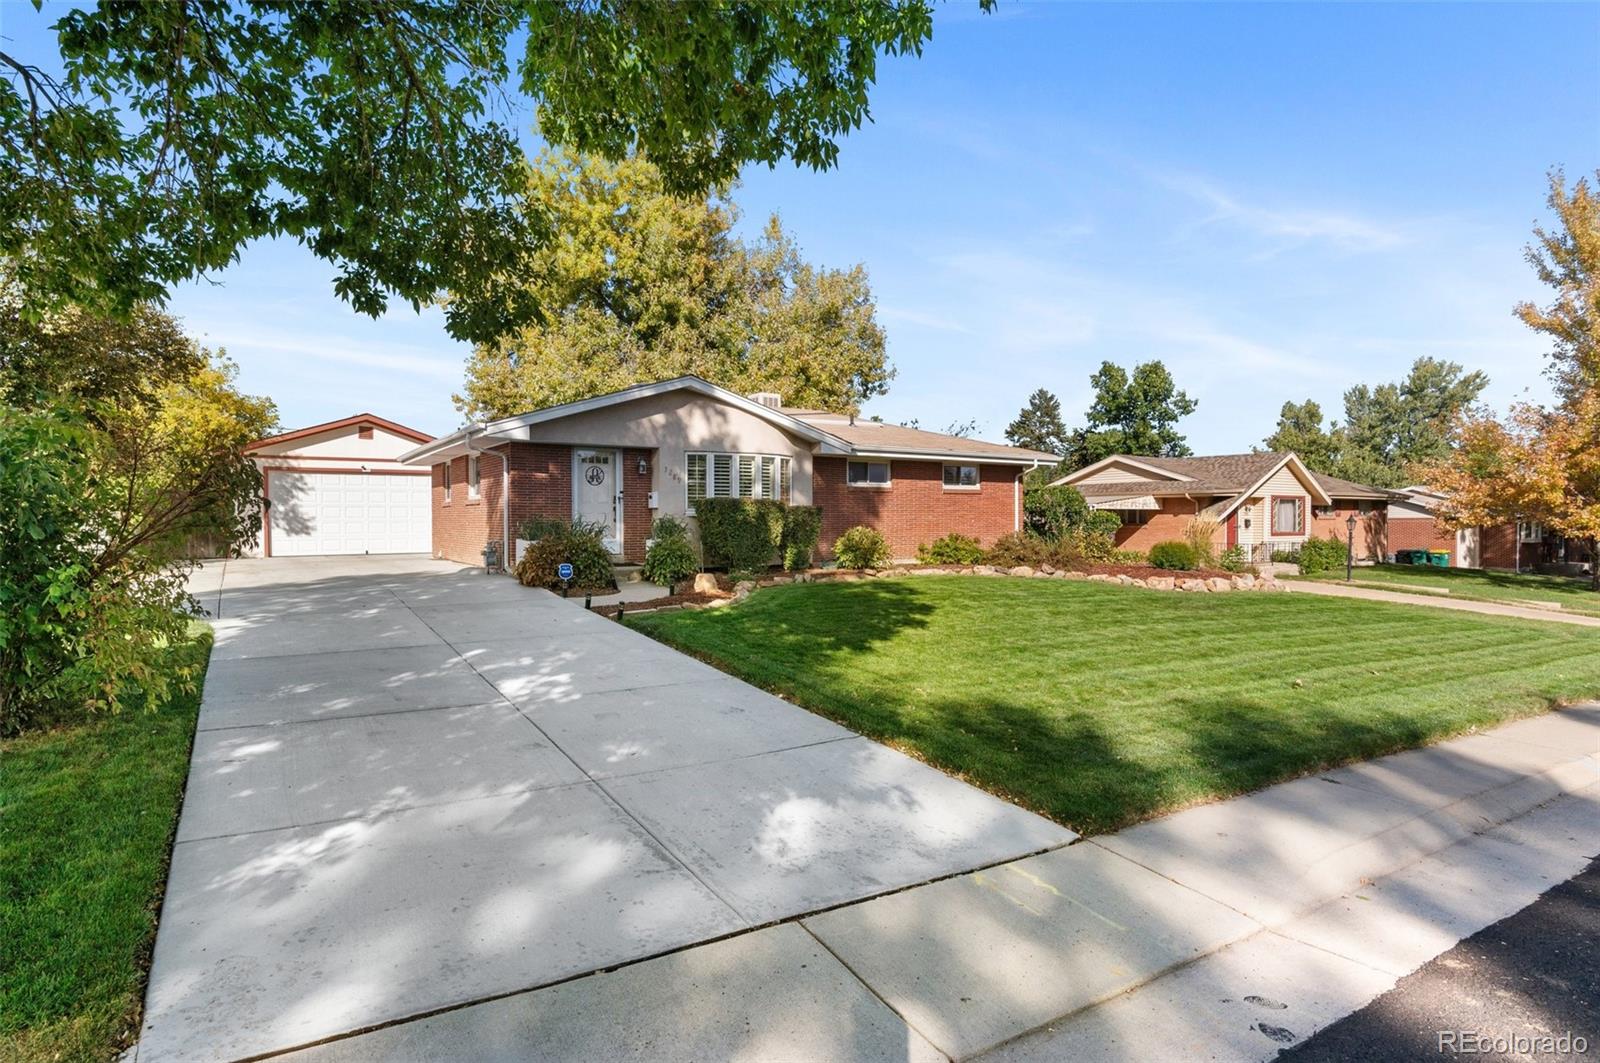 7289 s lincoln way, centennial sold home. Closed on 2024-01-05 for $622,500.